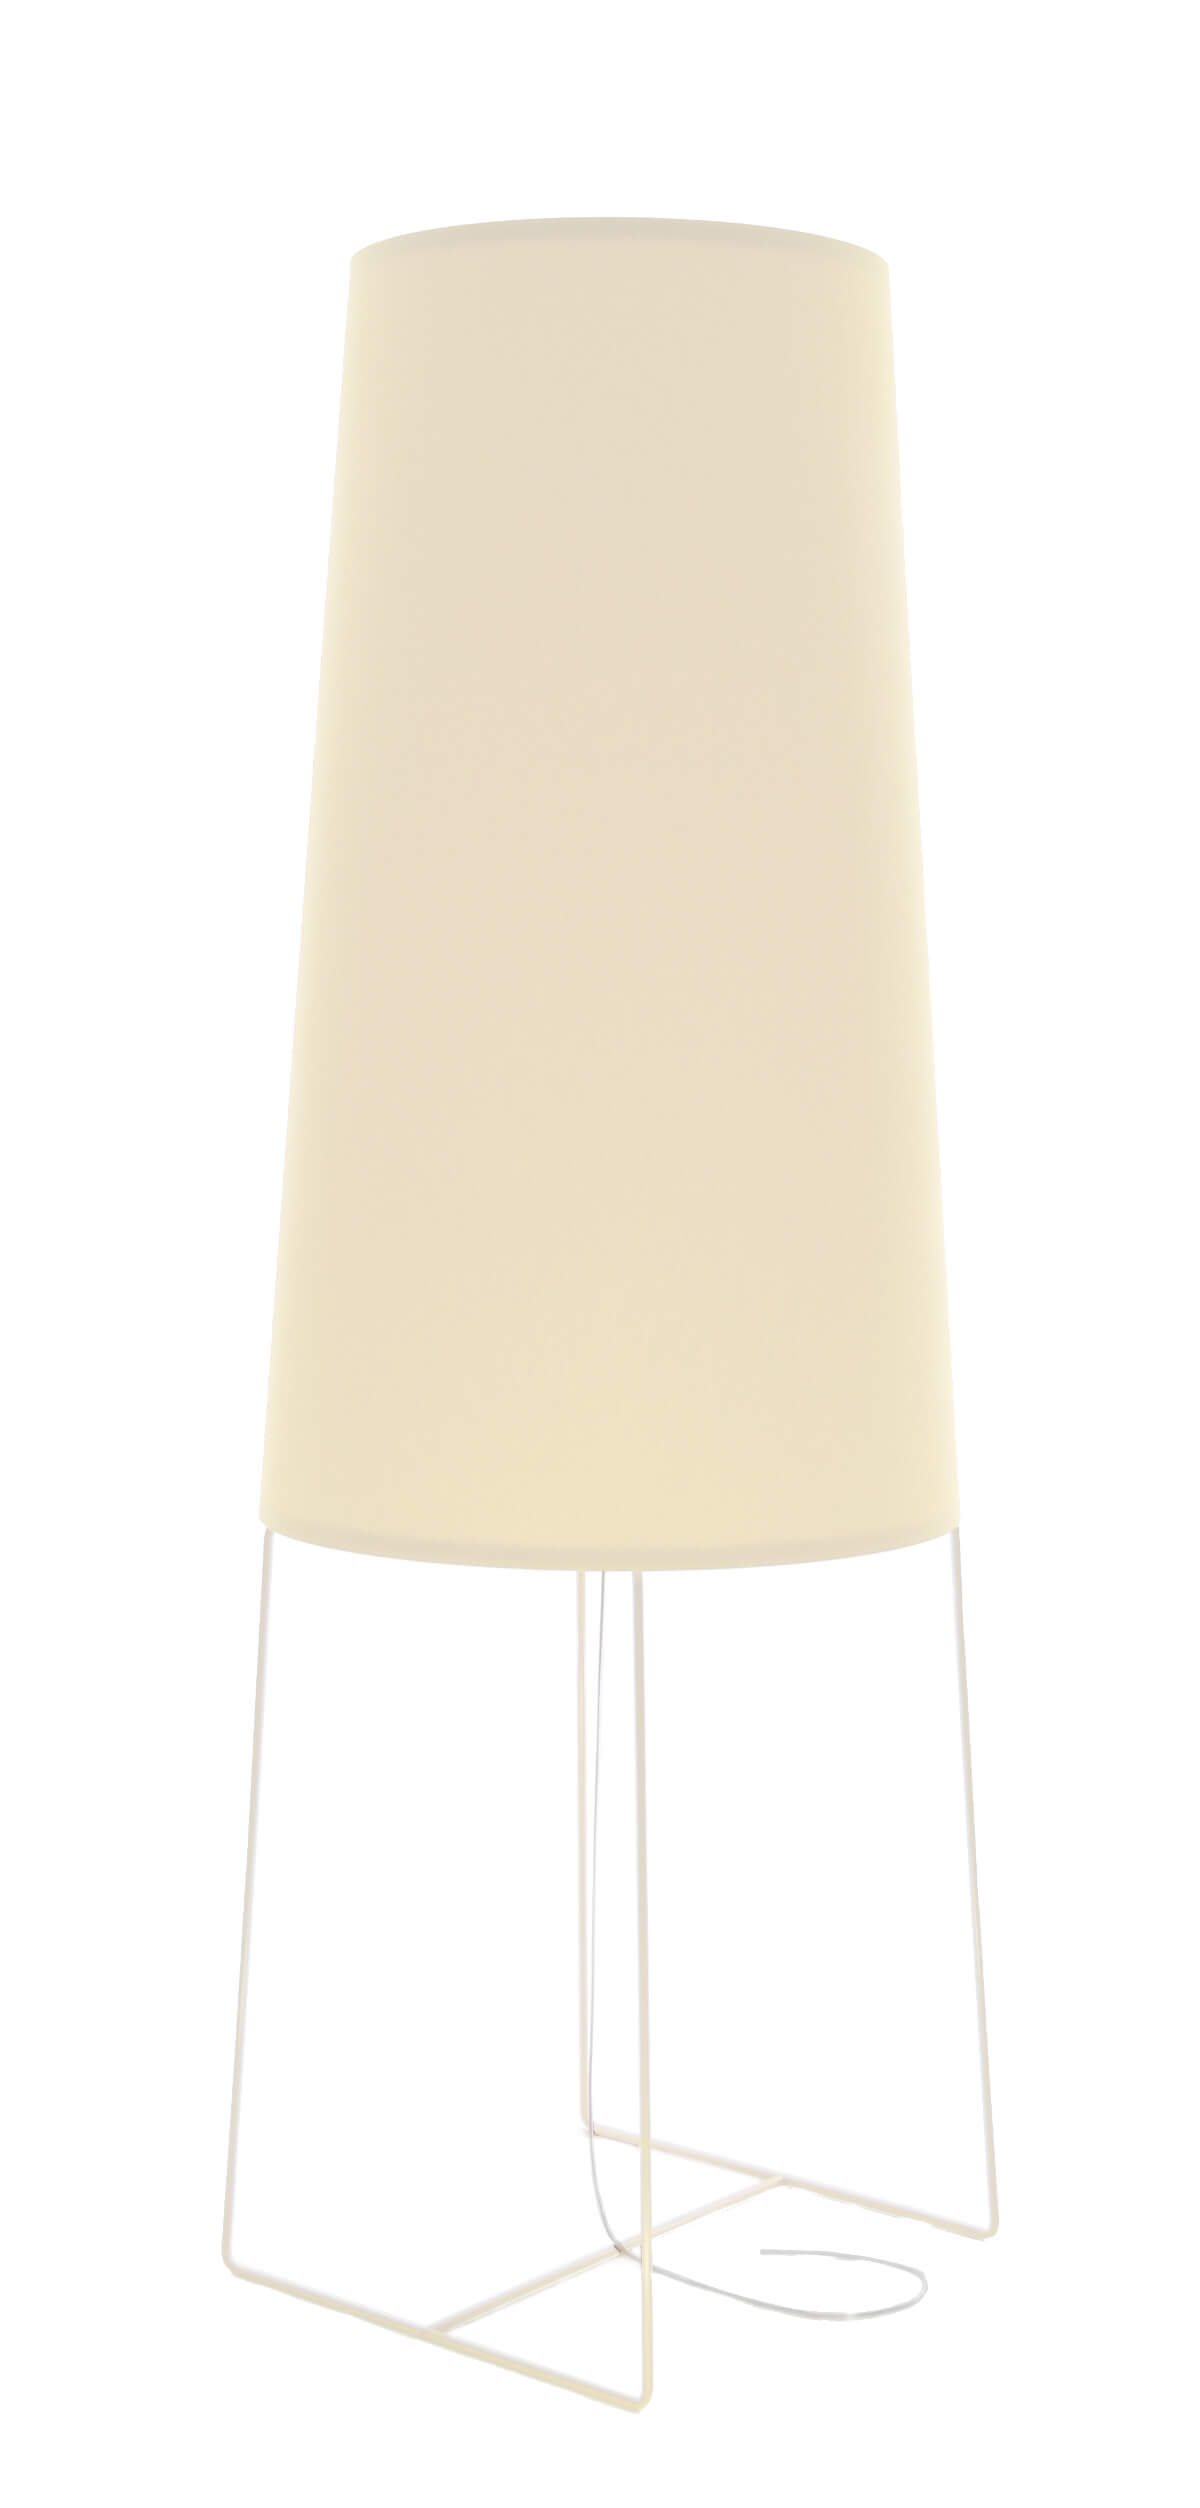 FatSophie Stehleuchte, Switch to Dim LED, beige